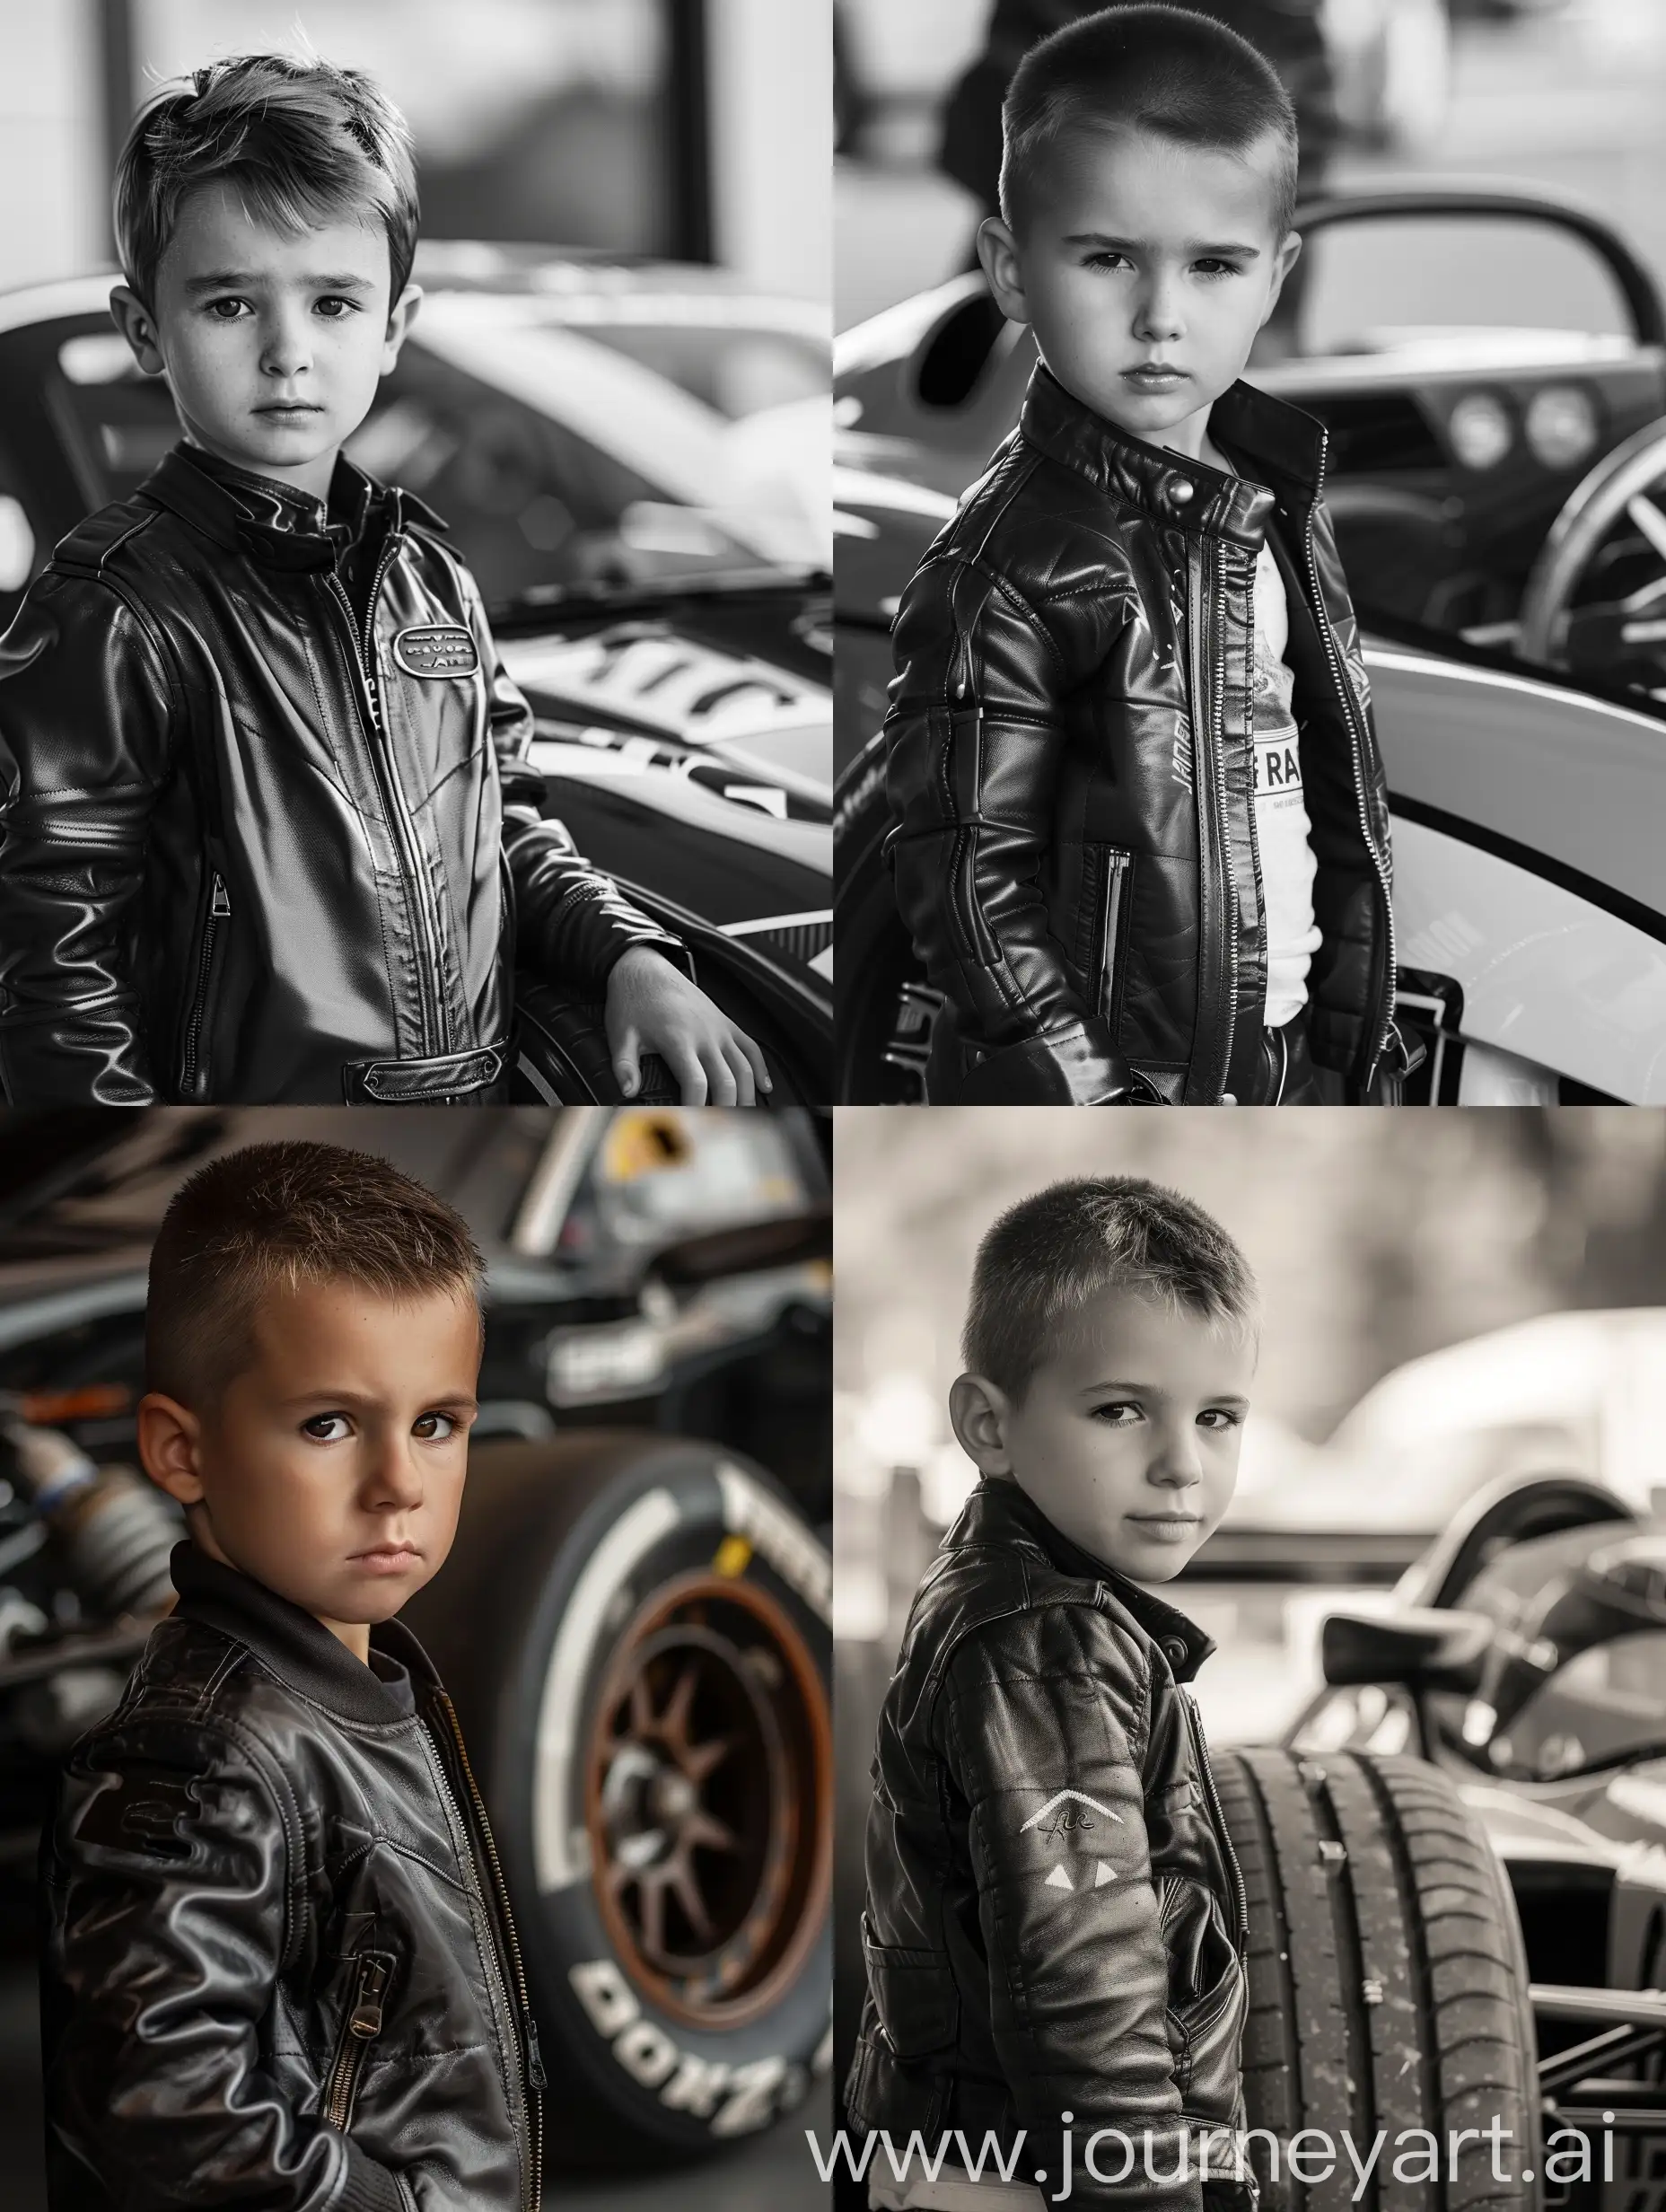 Young-Boy-in-Leather-Jacket-Poses-by-Tuned-Racing-Car